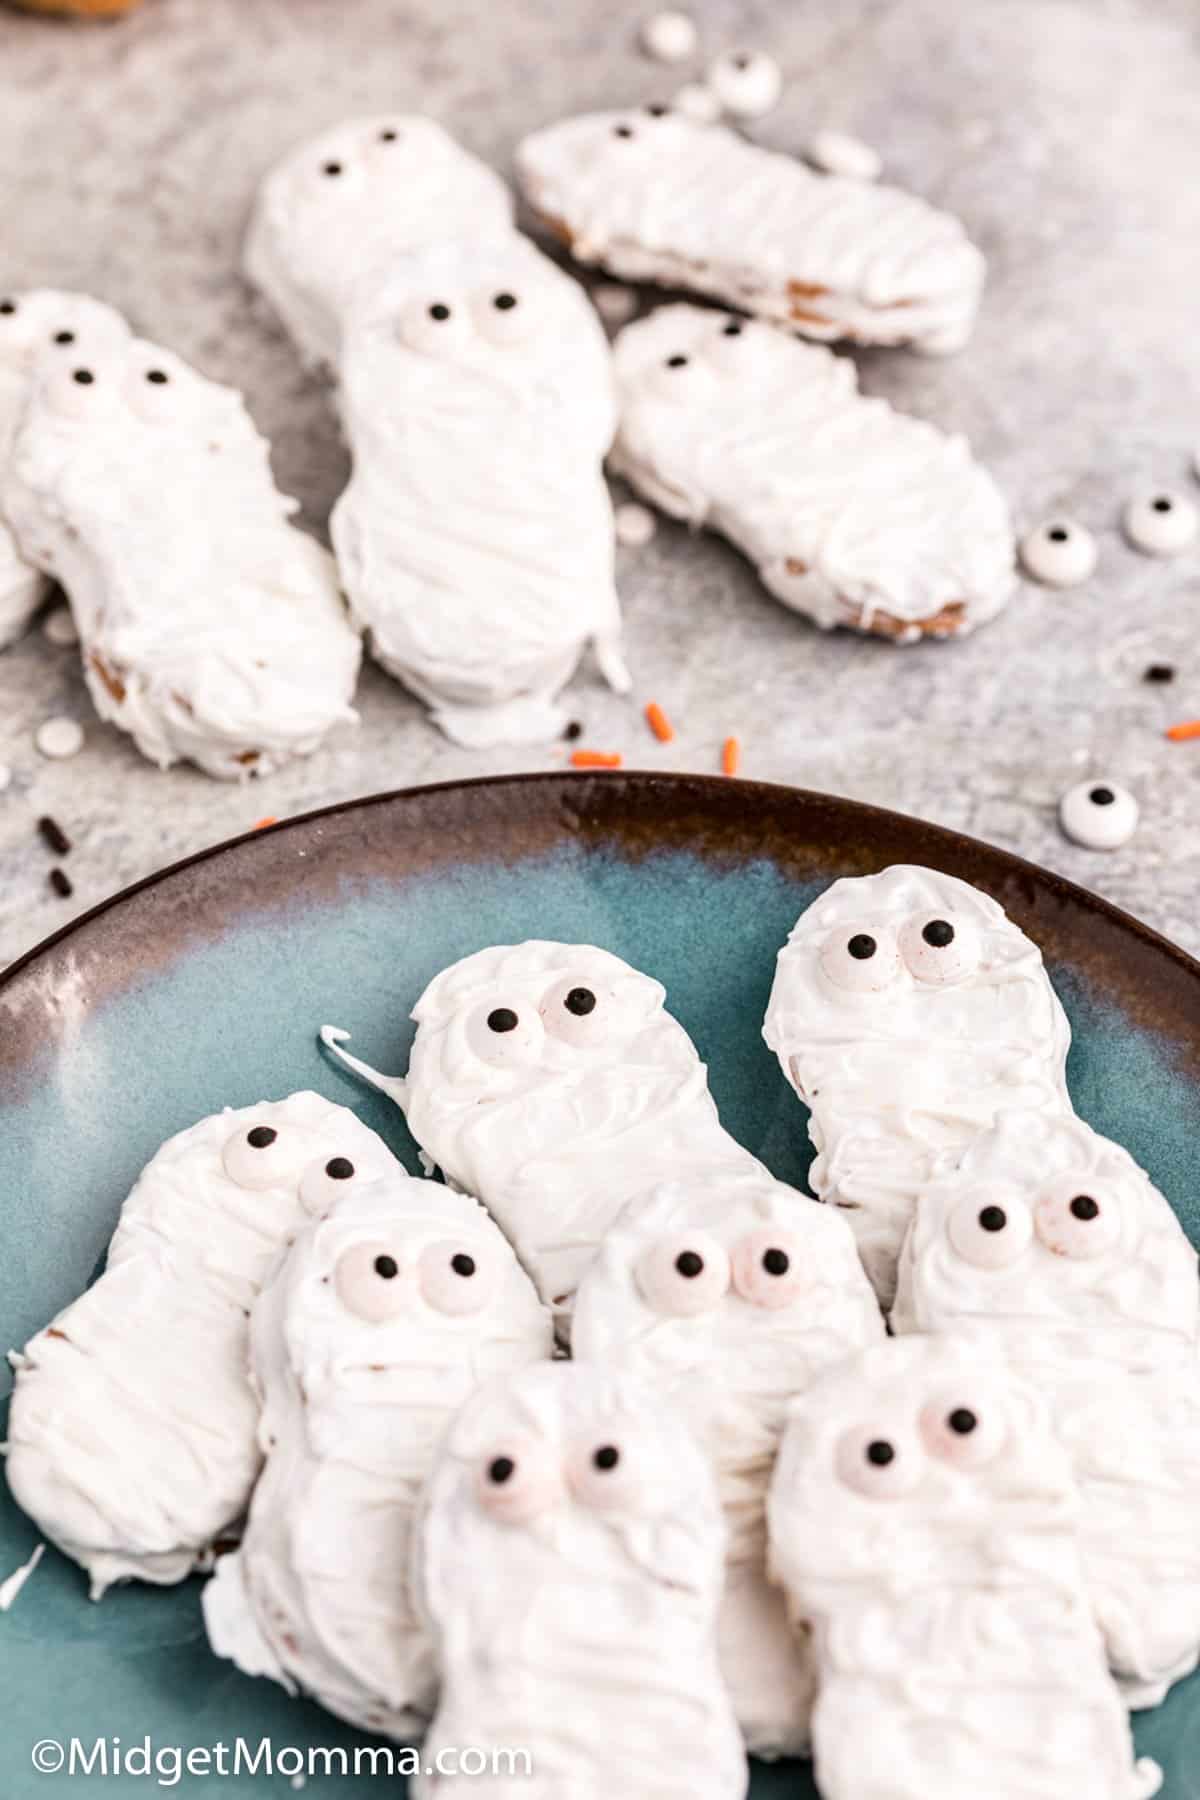 Mummy cookies on a plate